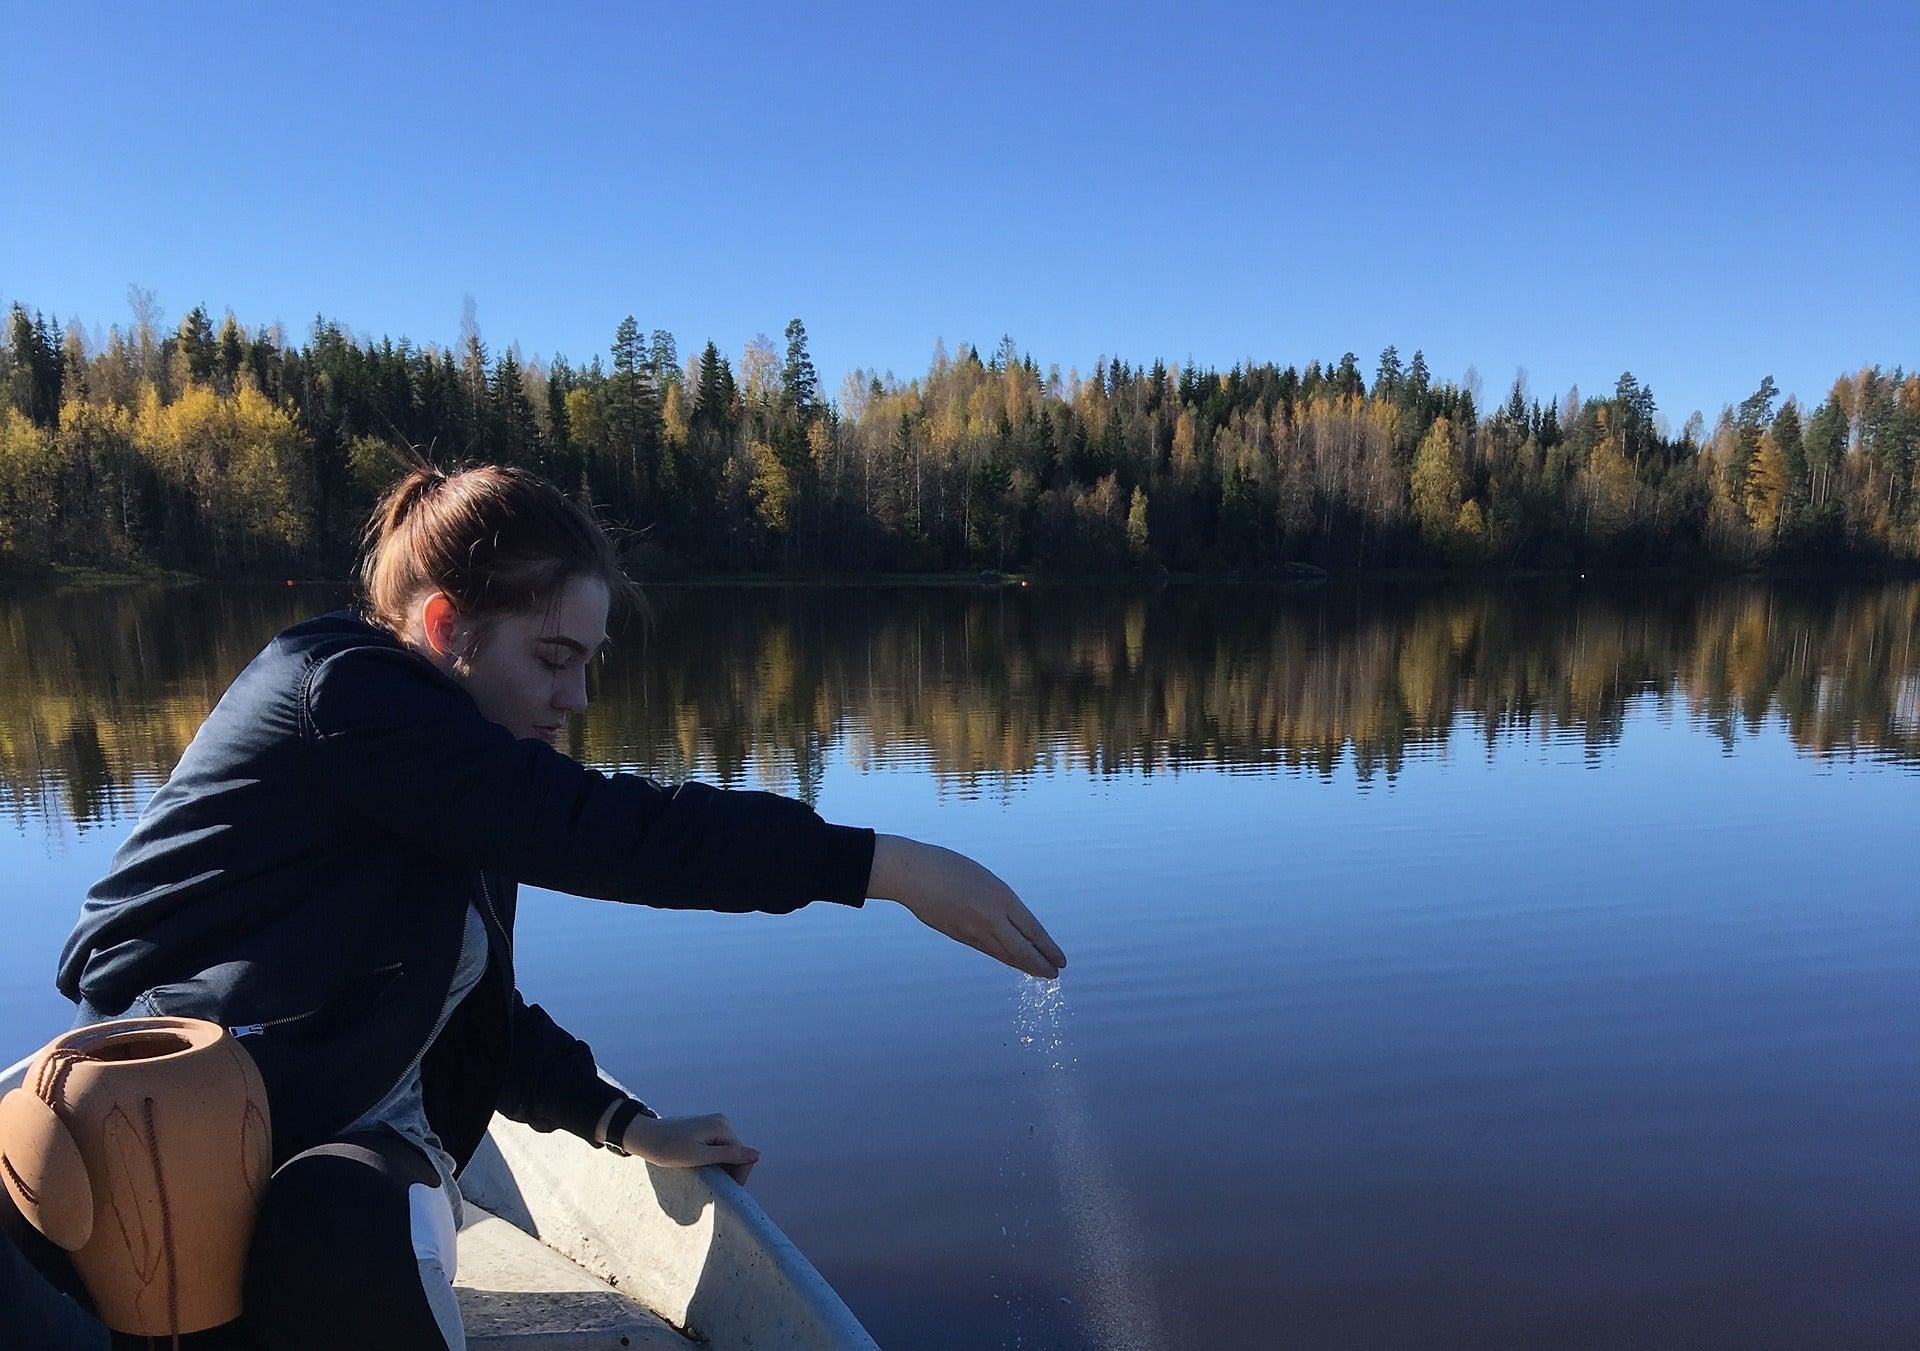 A girl scattering ashes somewhere in USA on a serene lake during autumn